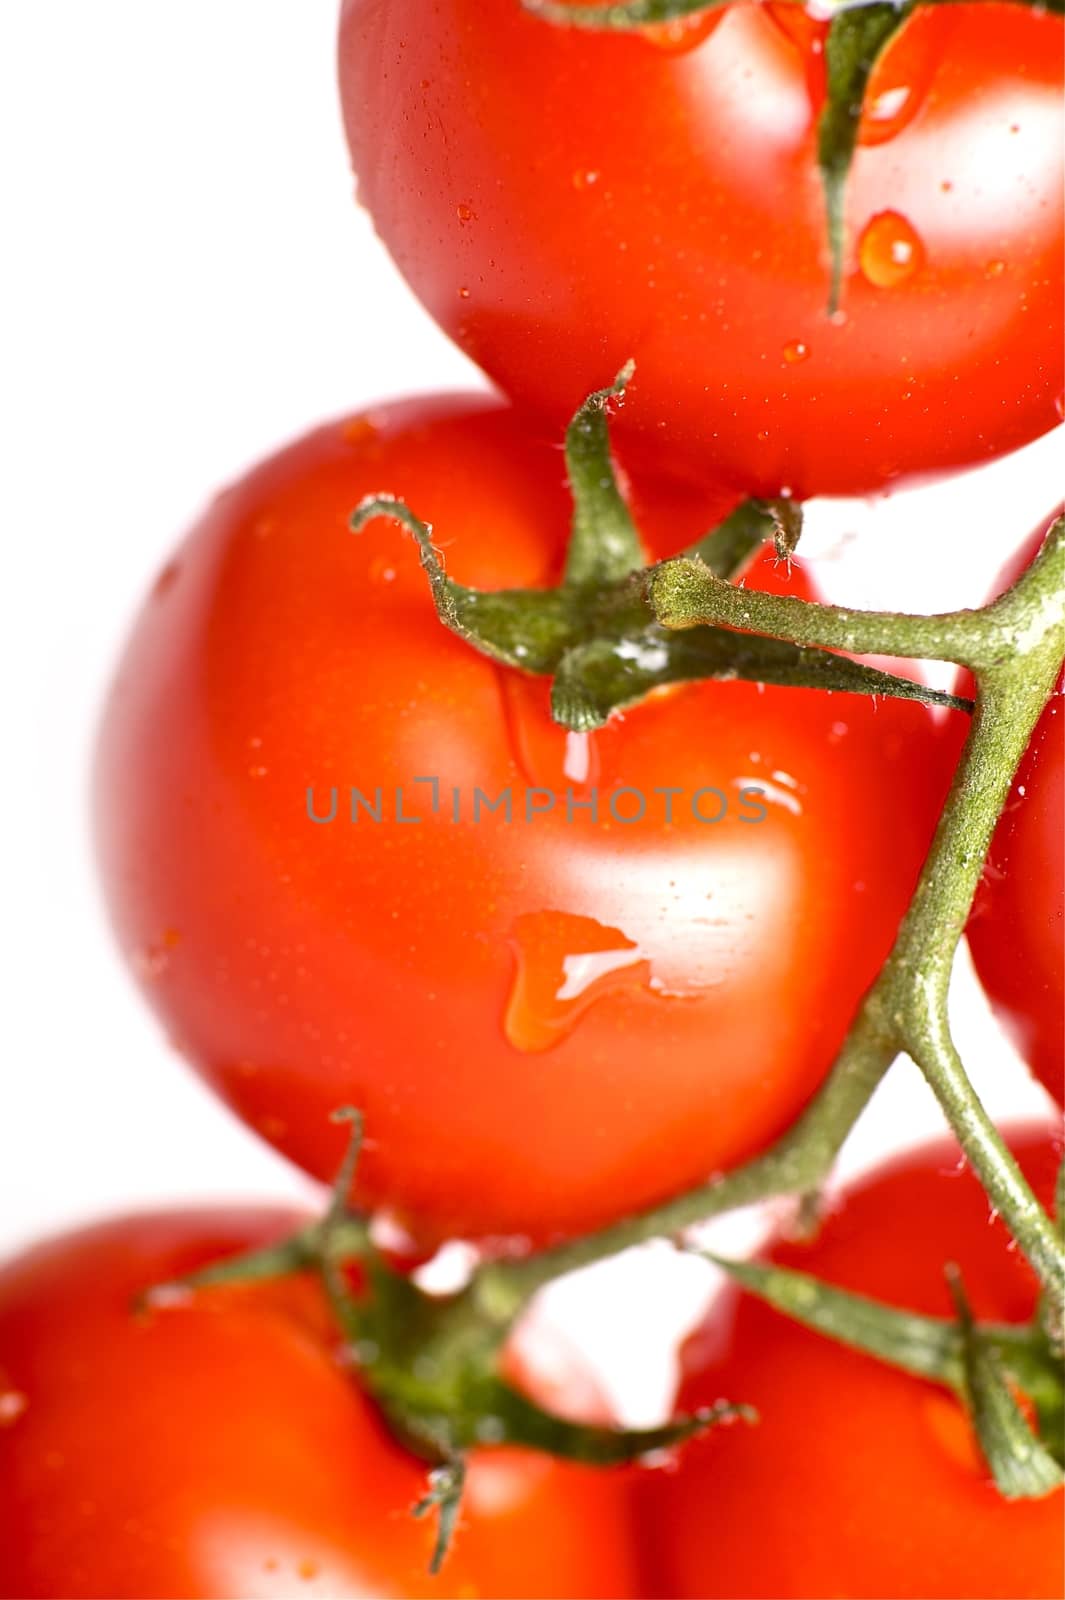 Tomatoes Freshness. Studio Vertical Shot. Fresh Red Tomatoes in Water. Fruits and Vegetables Photo Collection.